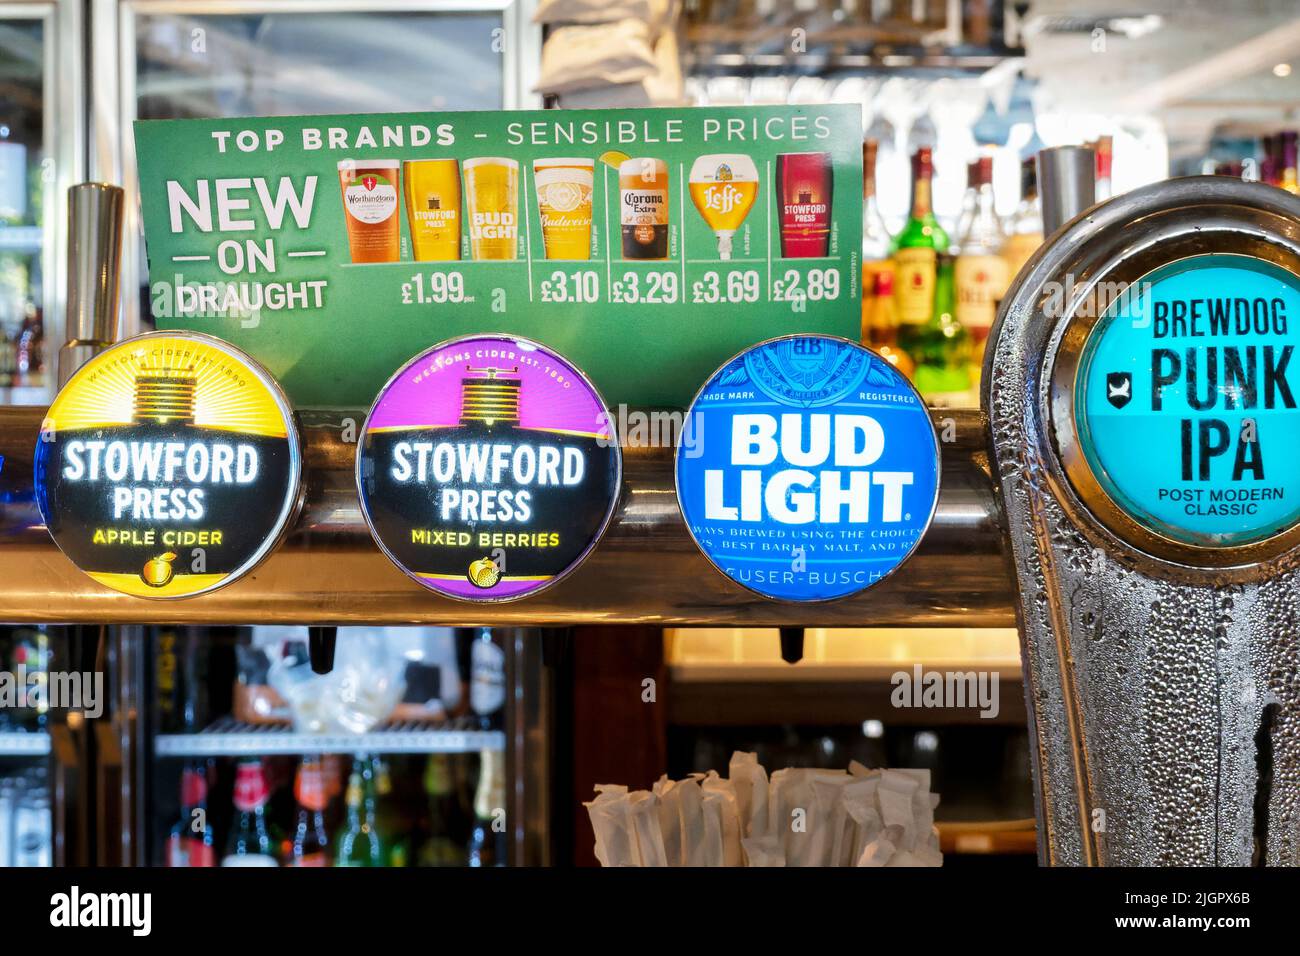 An image of the bar area in a JD Wetherspoons pub clearly showing an advertising board showing low priced beer and lager available from the pub chain Stock Photo